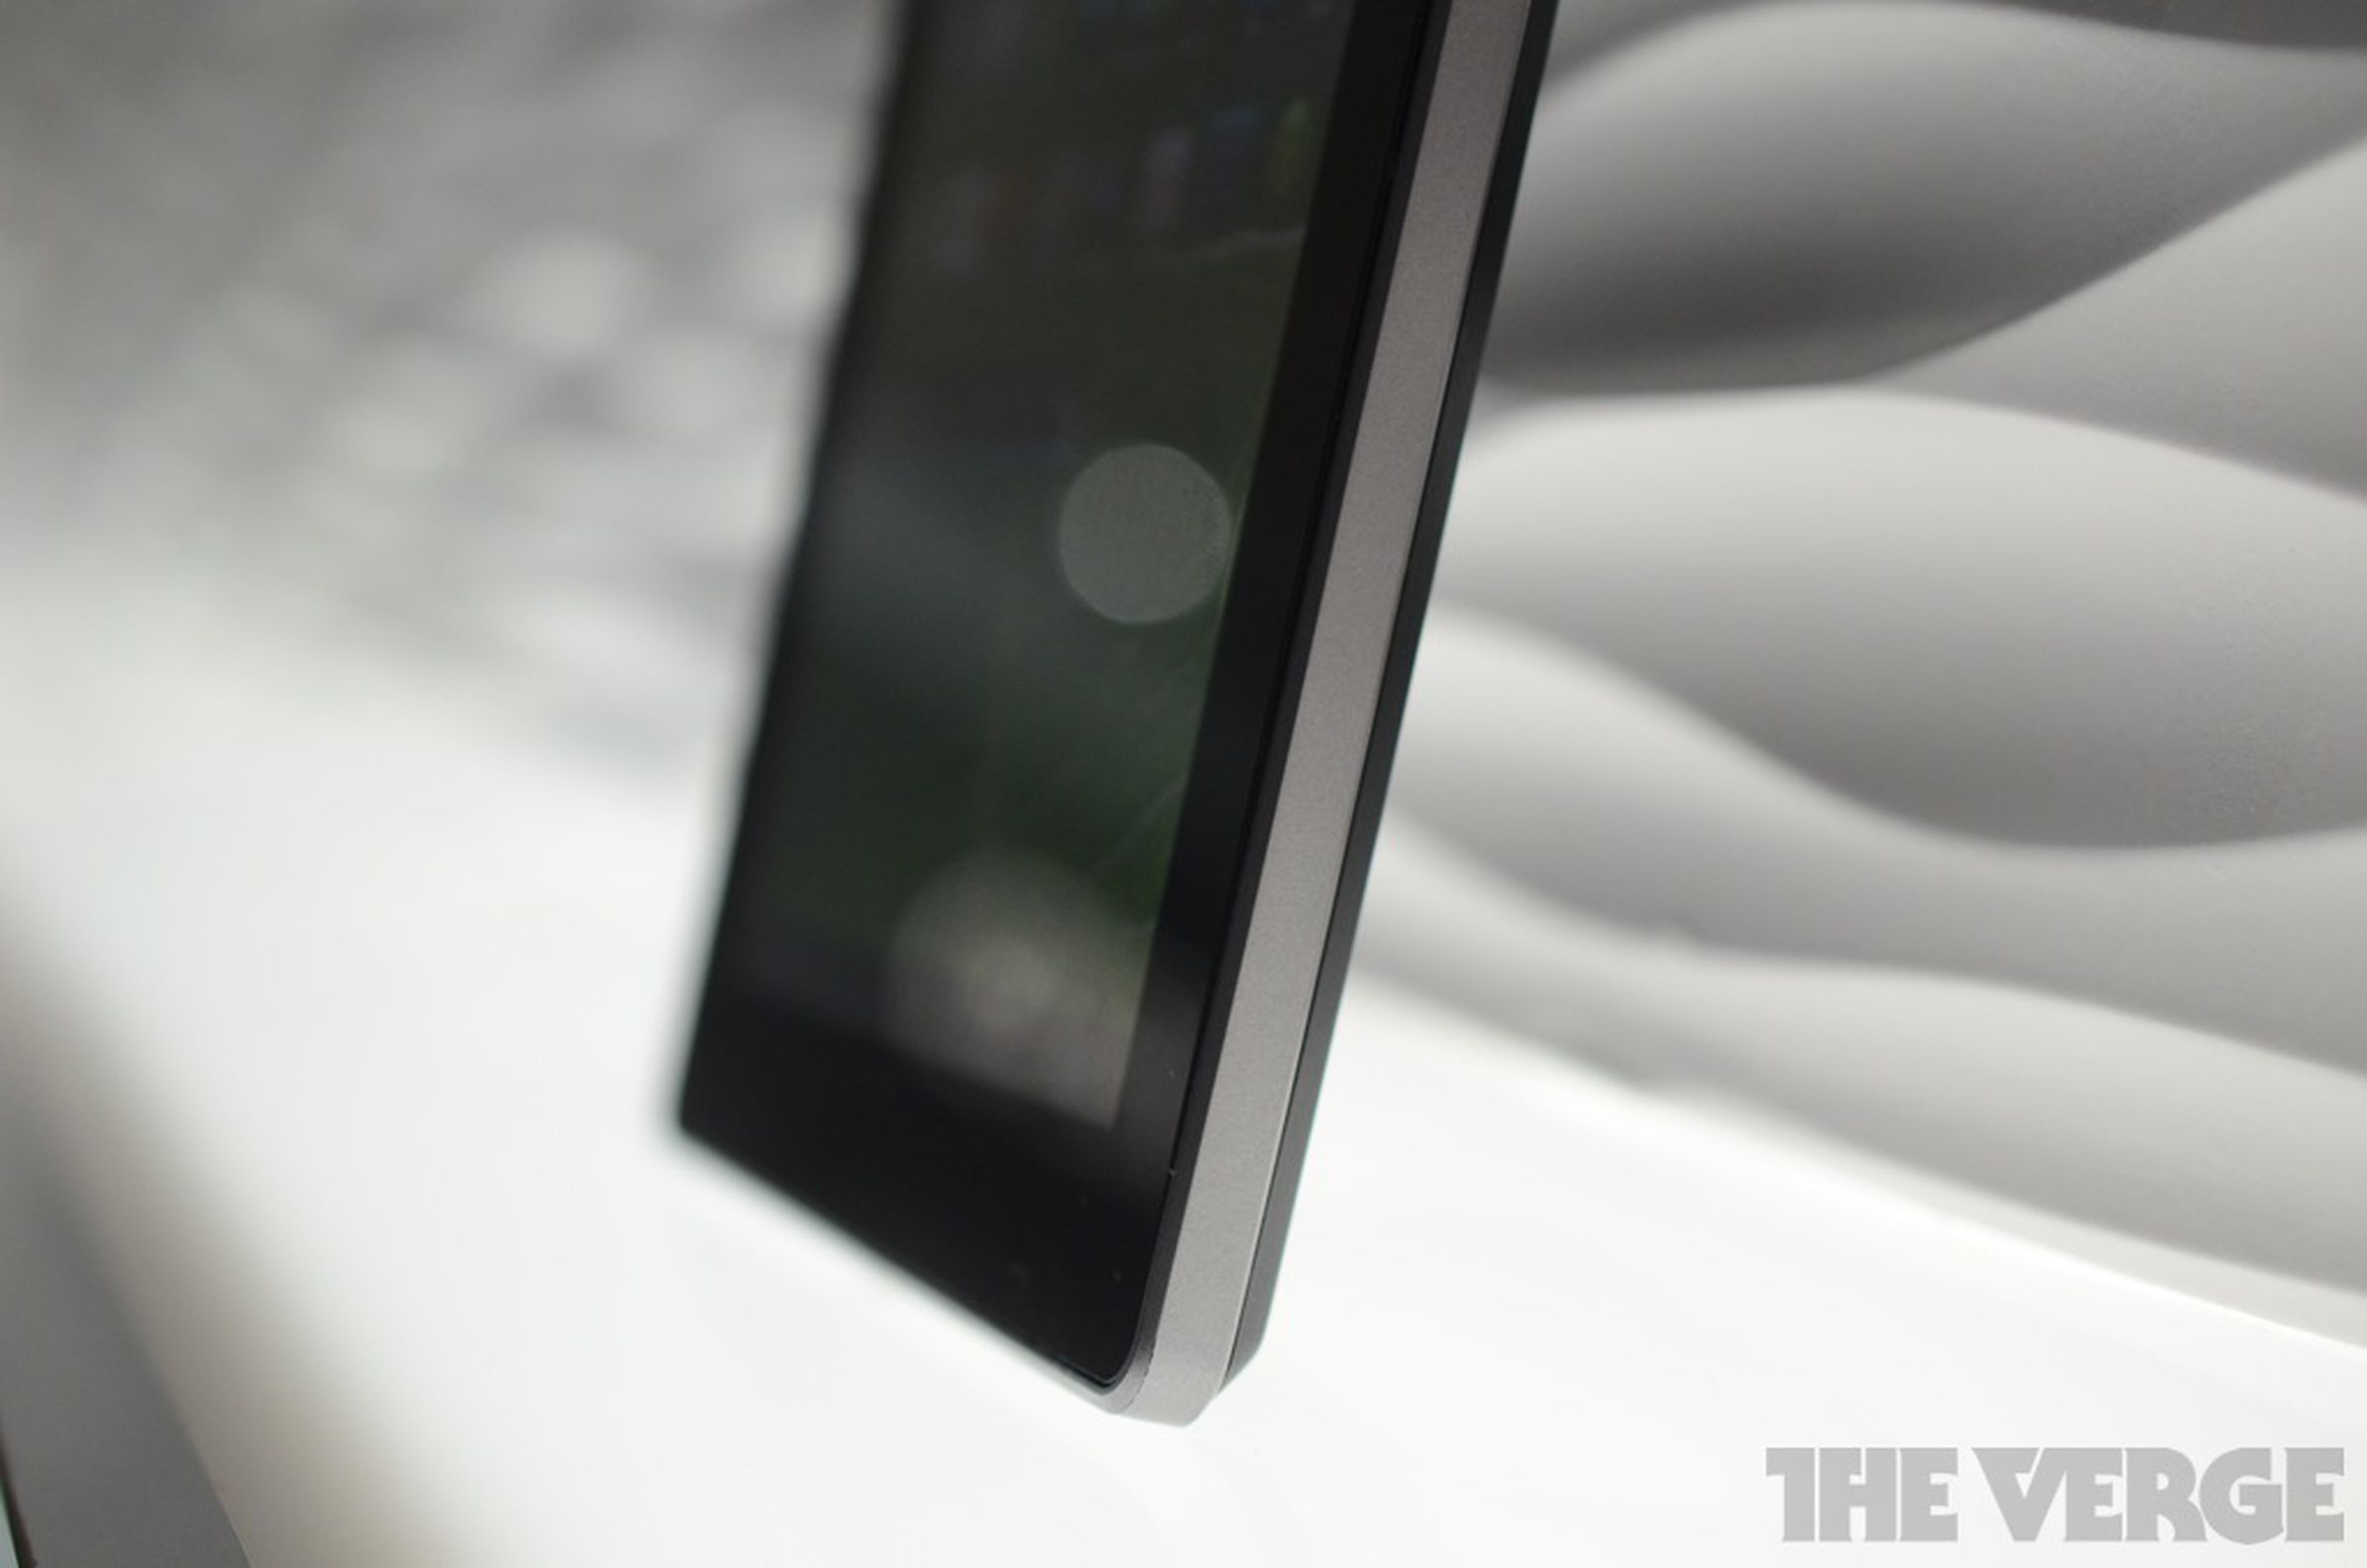 Vizio 7-inch Tablet hands-on pictures